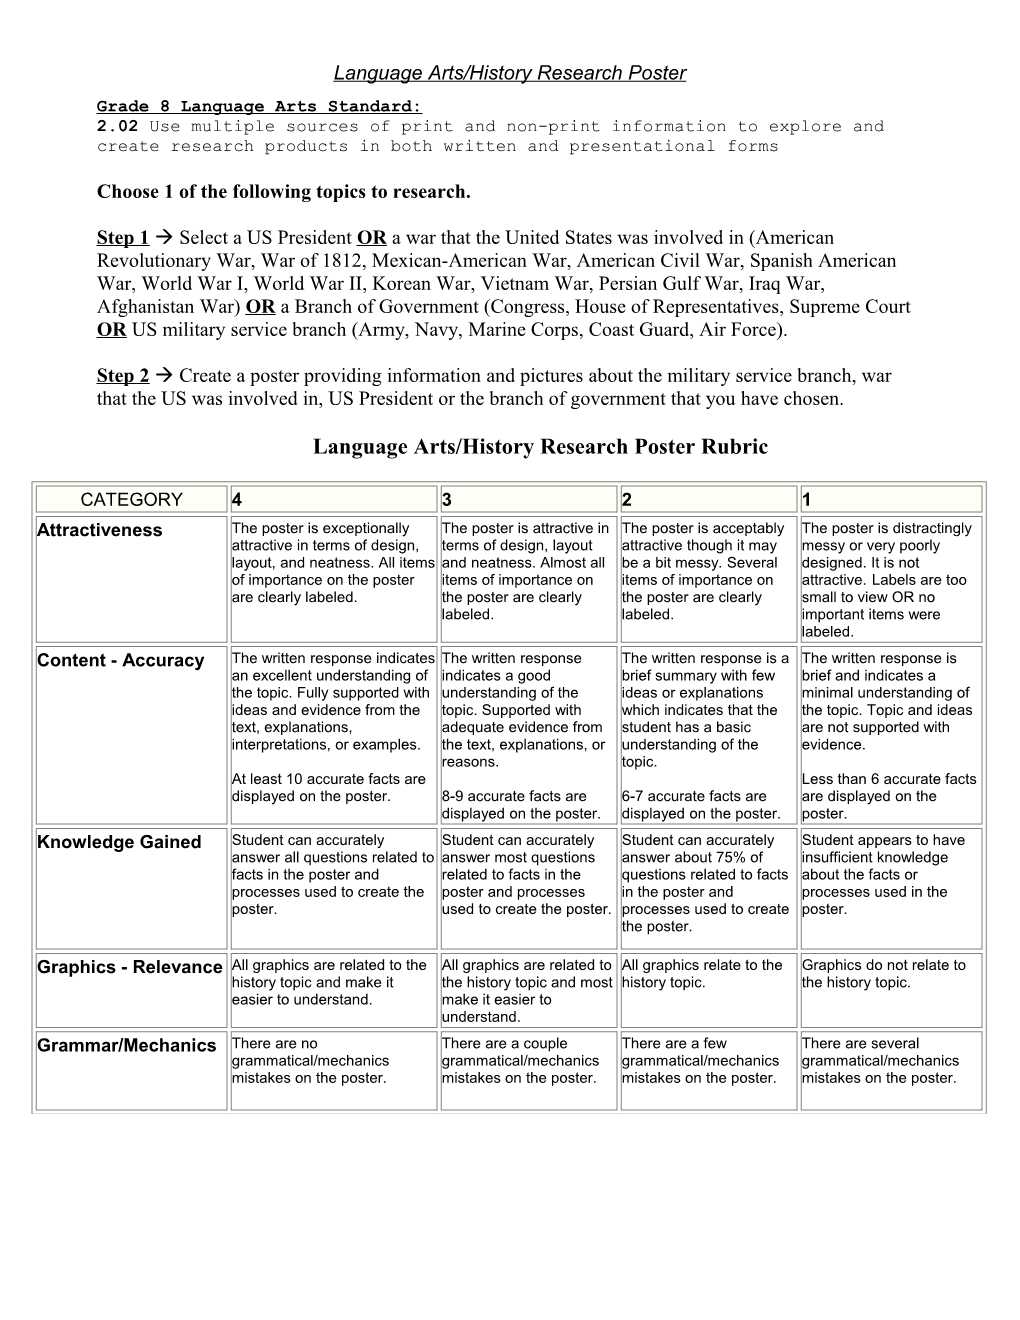 History Research Poster Rubric